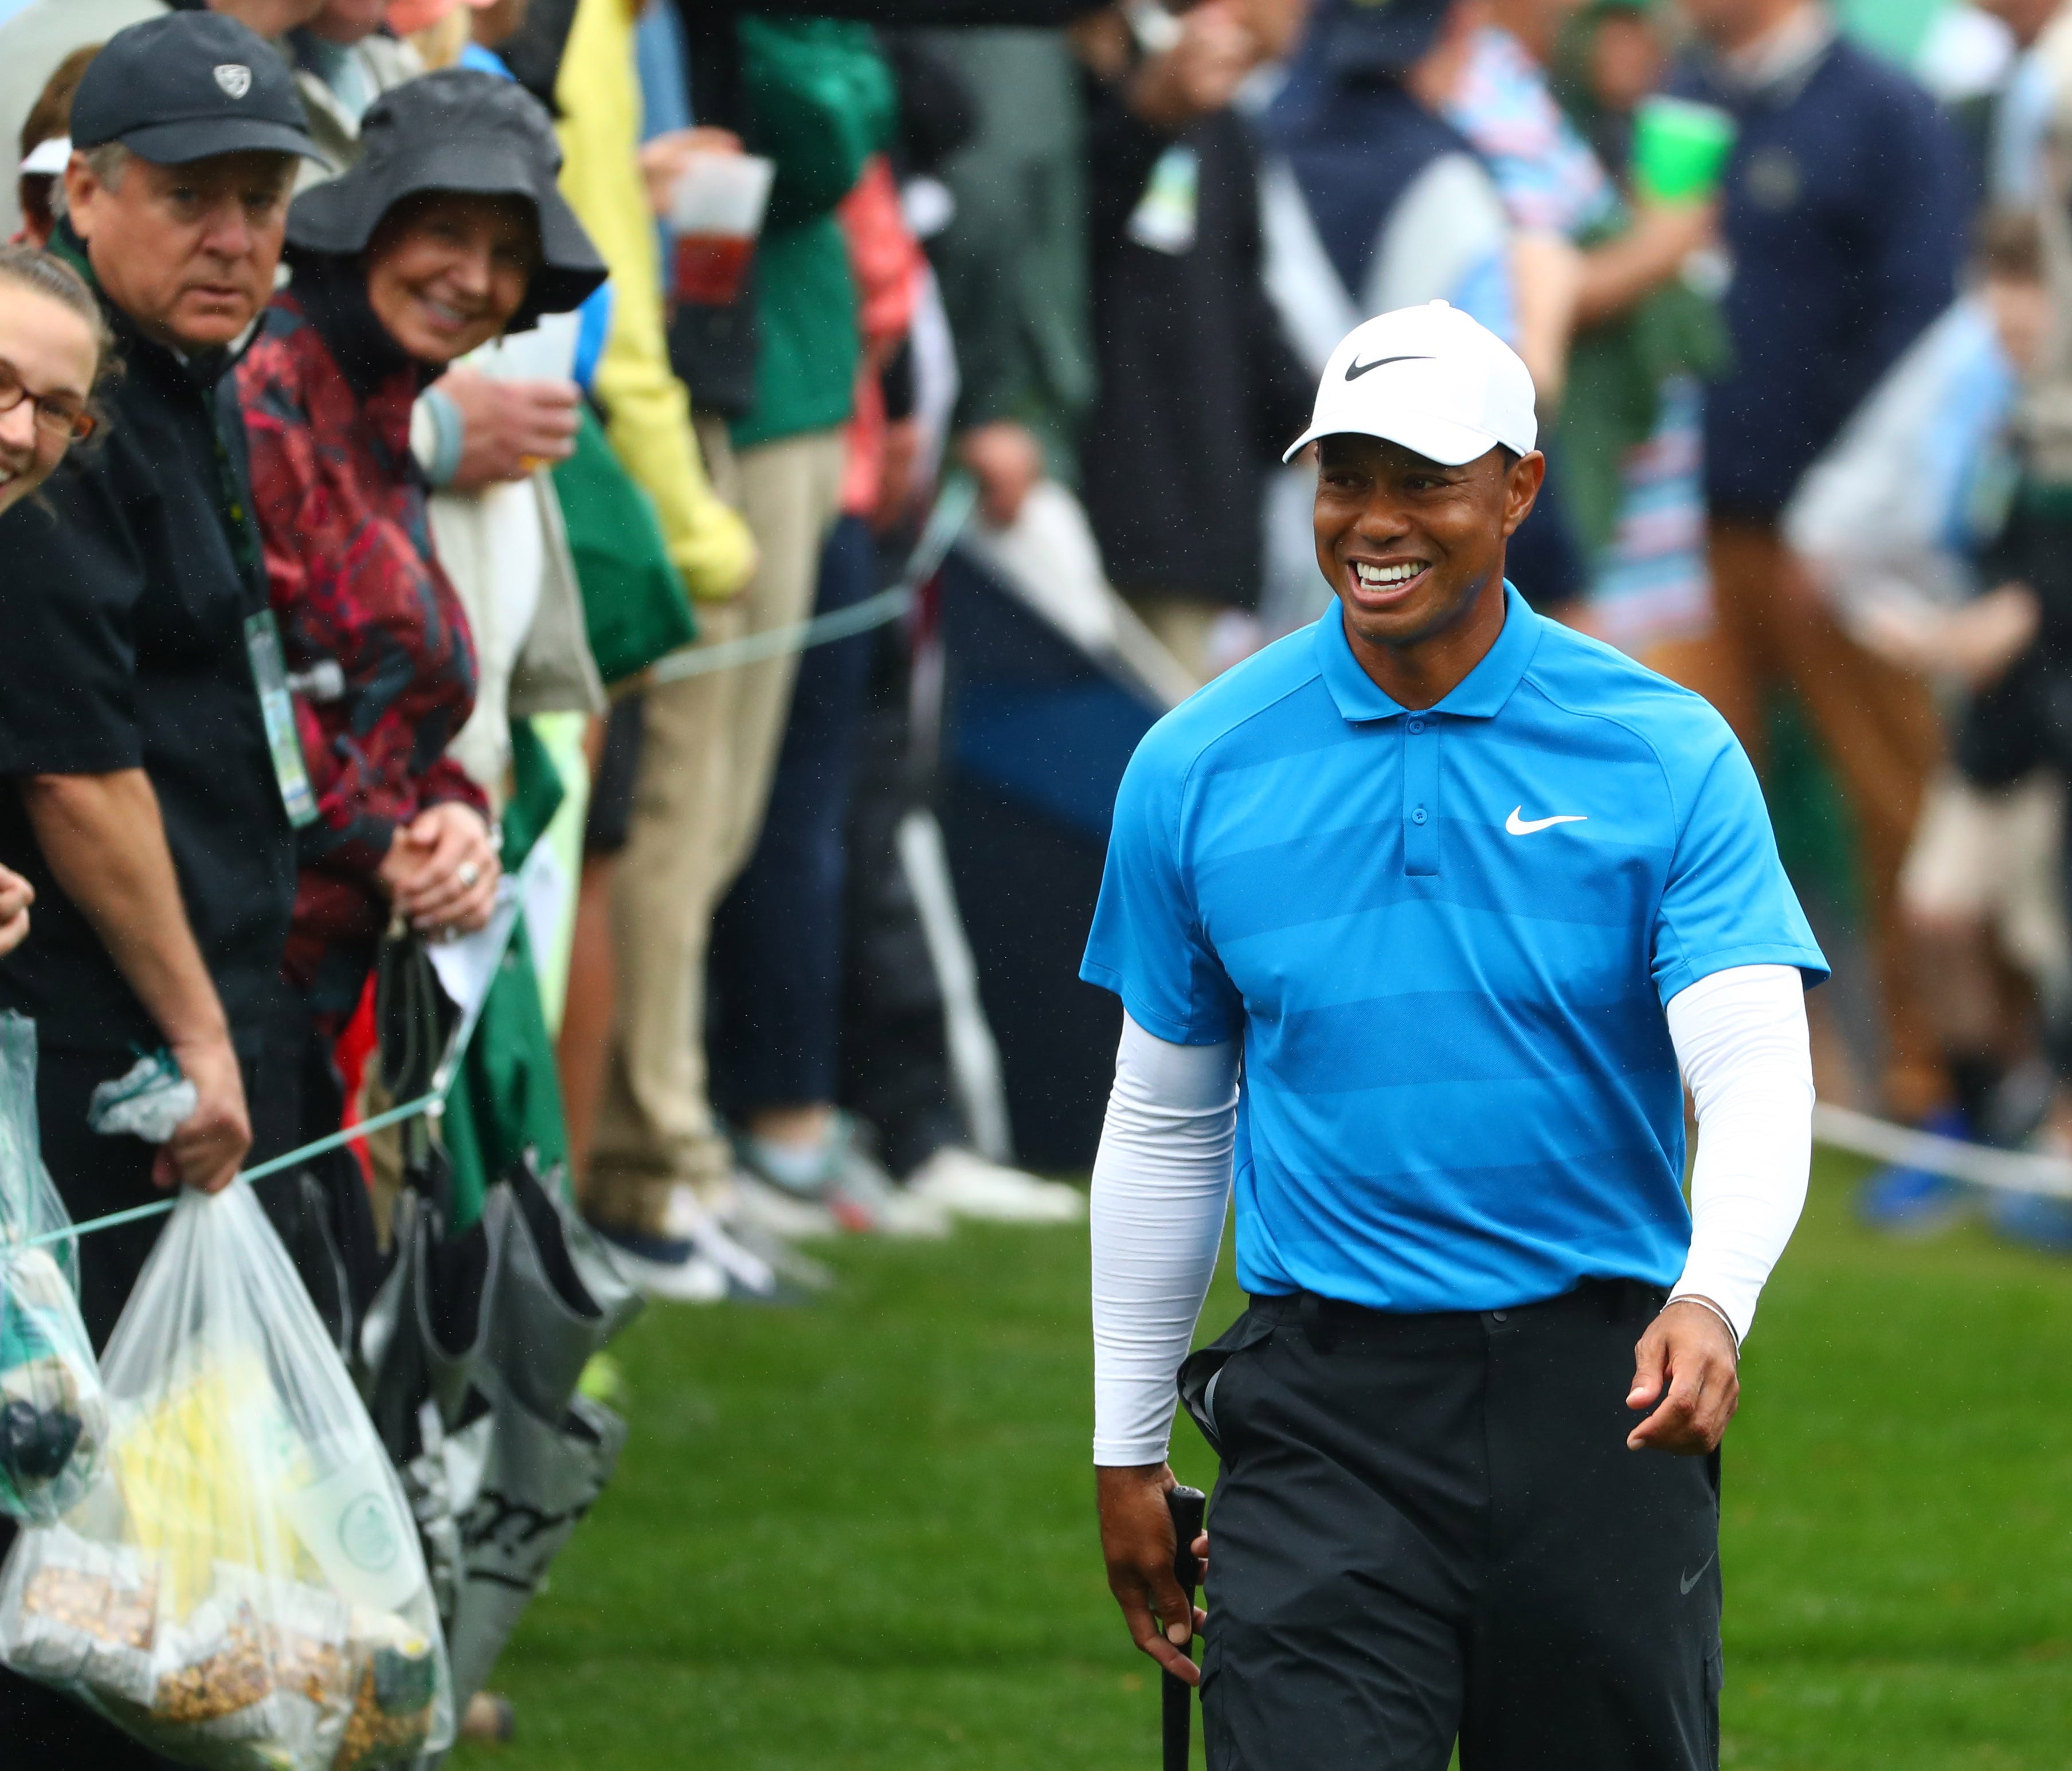 Tiger Woods smiles as he walks to the 8th tee during the third round of the Masters golf tournament at Augusta National Golf Club.